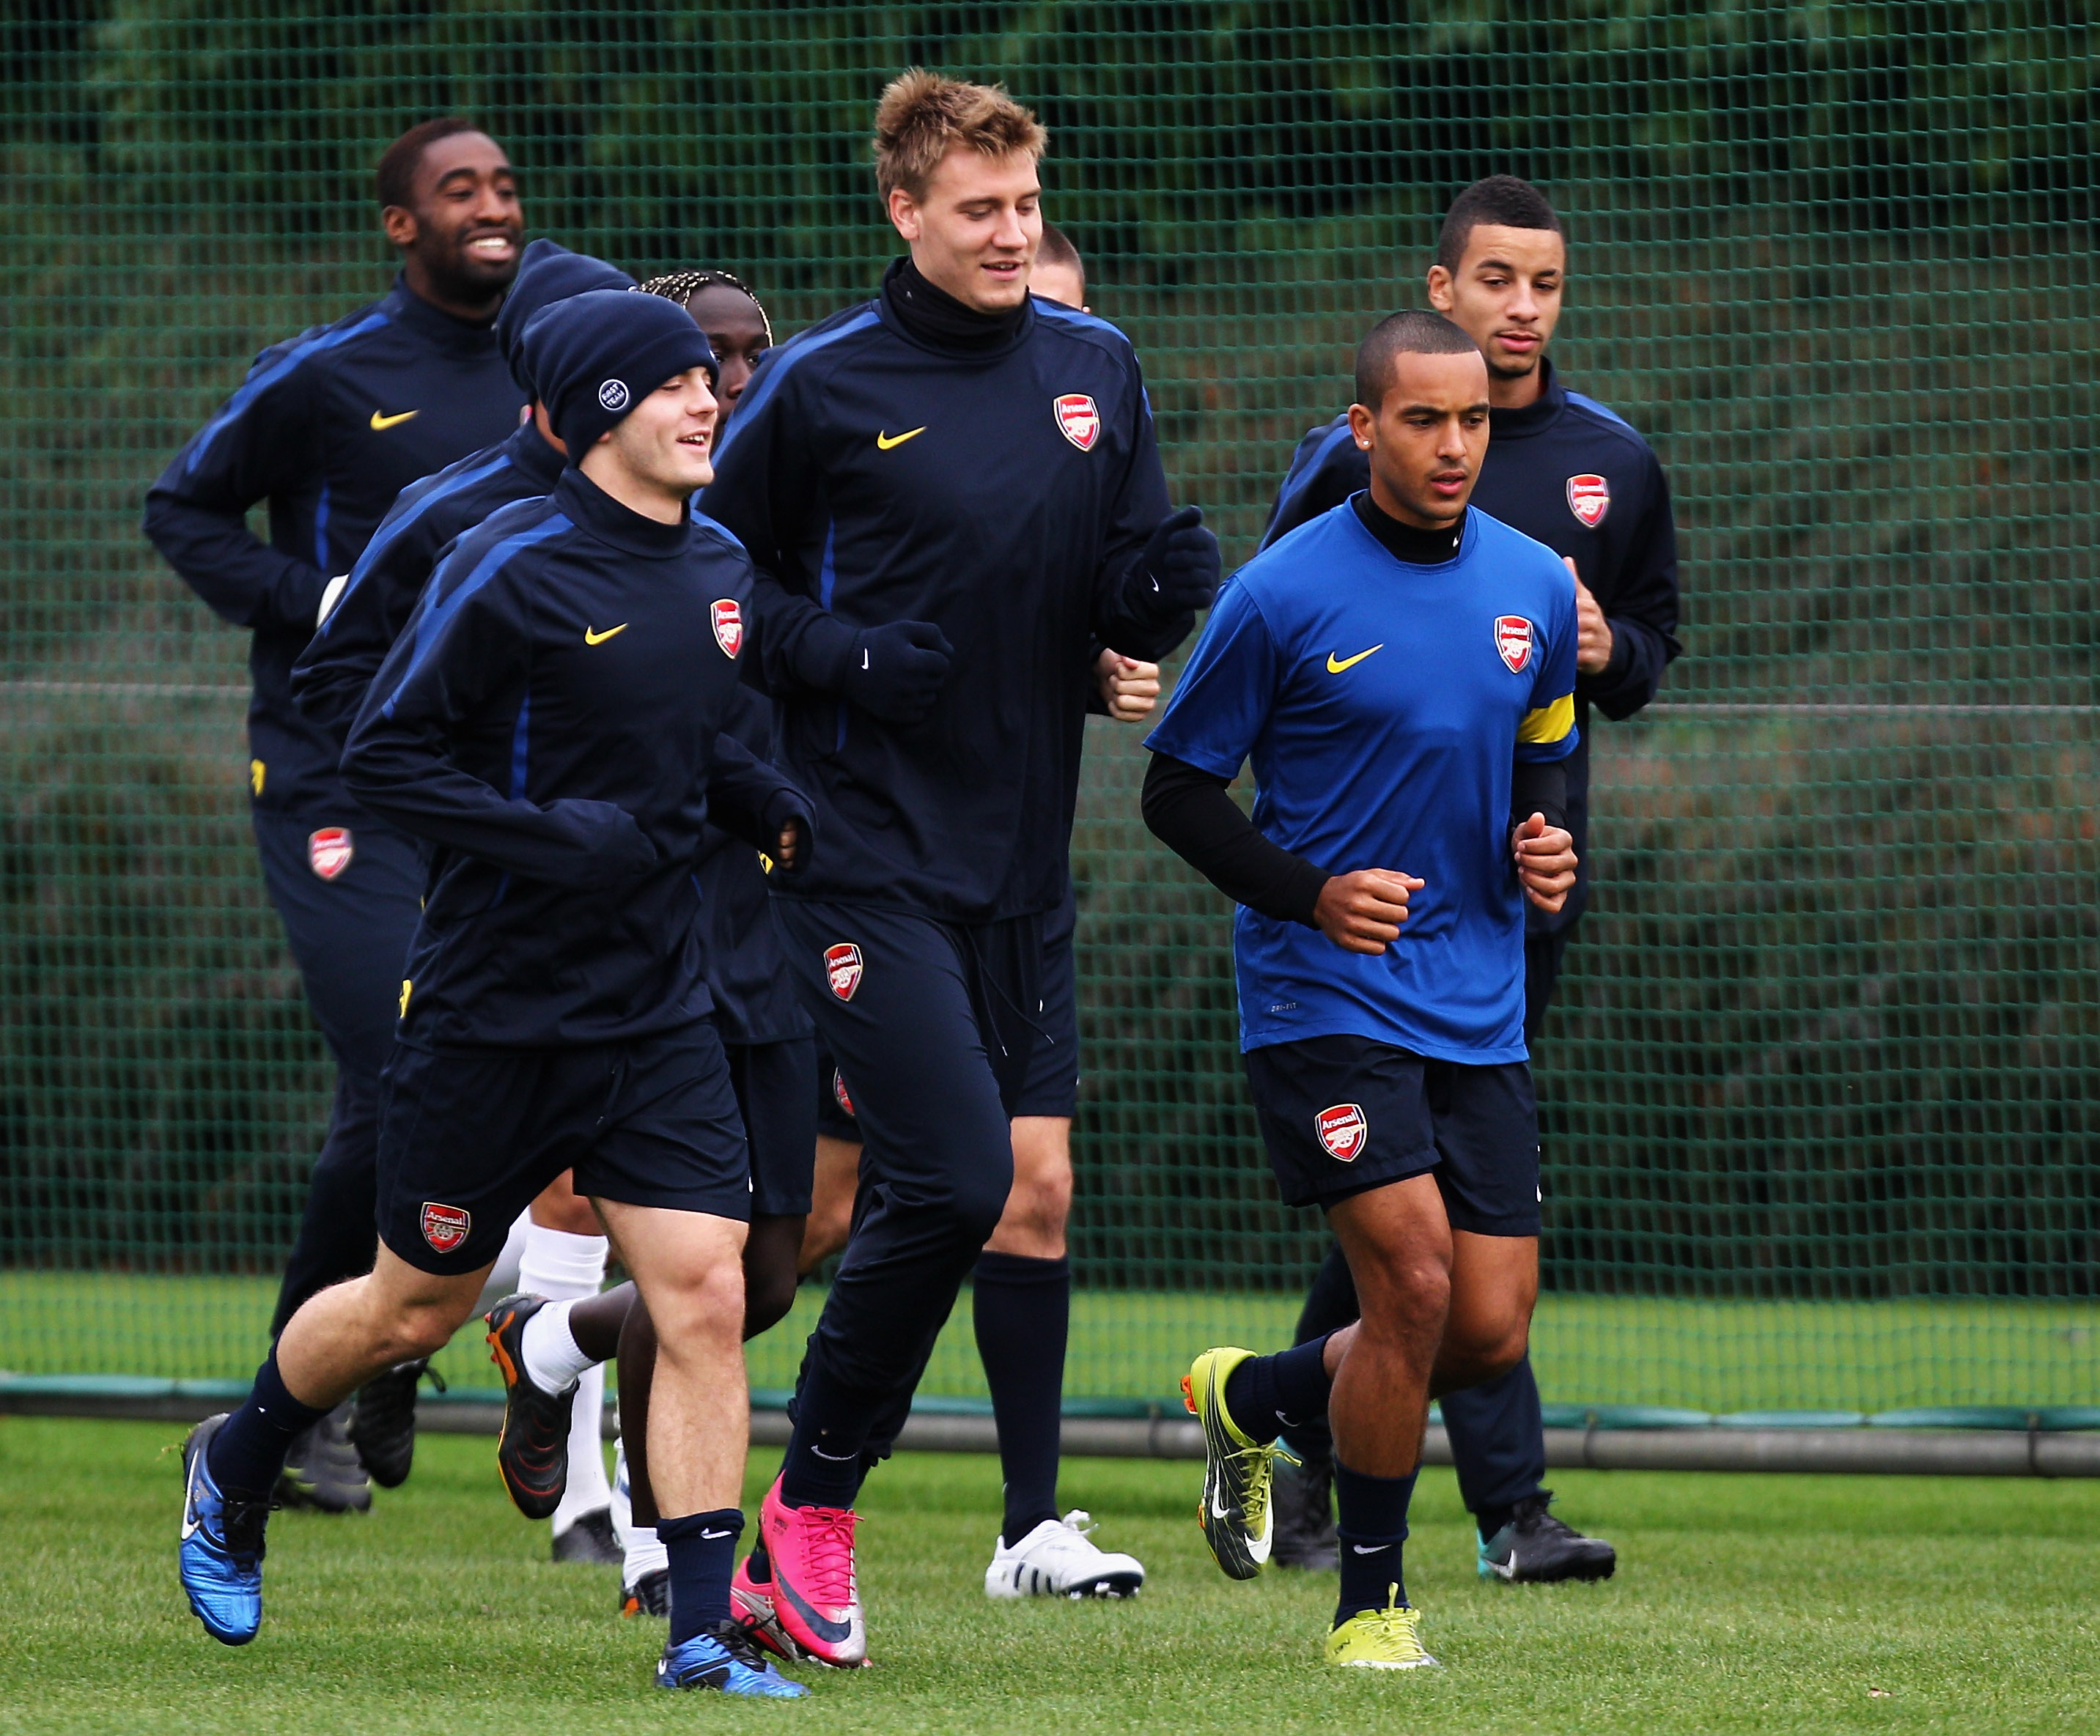 ST ALBANS, ENGLAND - NOVEMBER 02:  (L-R) Jack Wilshere, Nicklas Bendtner and Theo Walcott lead the warm up during a training session ahead of the UEFA Champions League Group H match against Shakhtar Donetsk at the club's complex at London Colney on Novemb